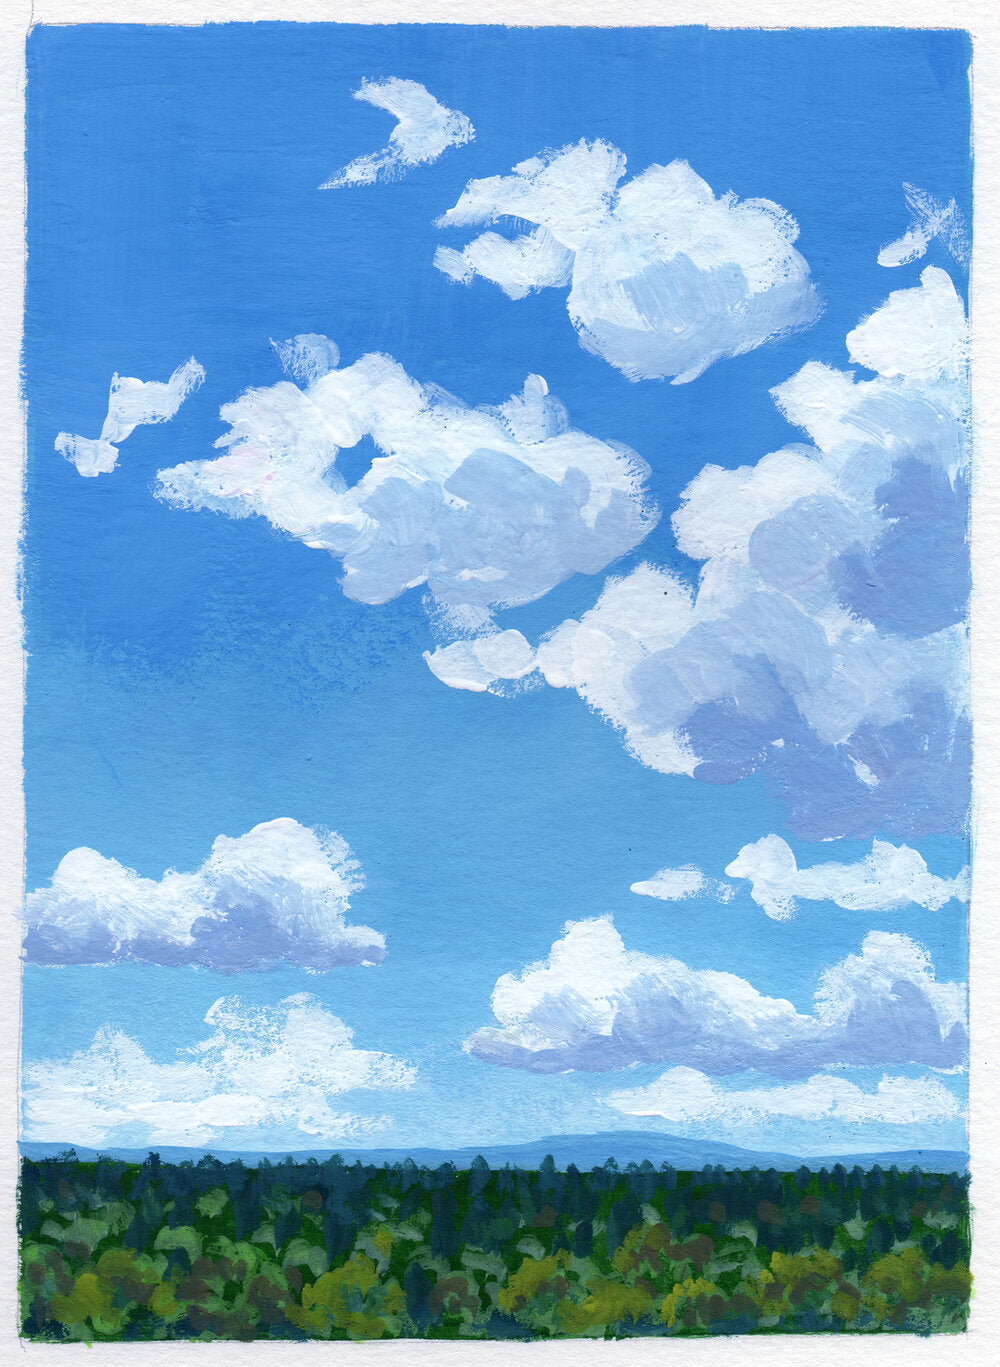 Clouds in September - 5"x7"